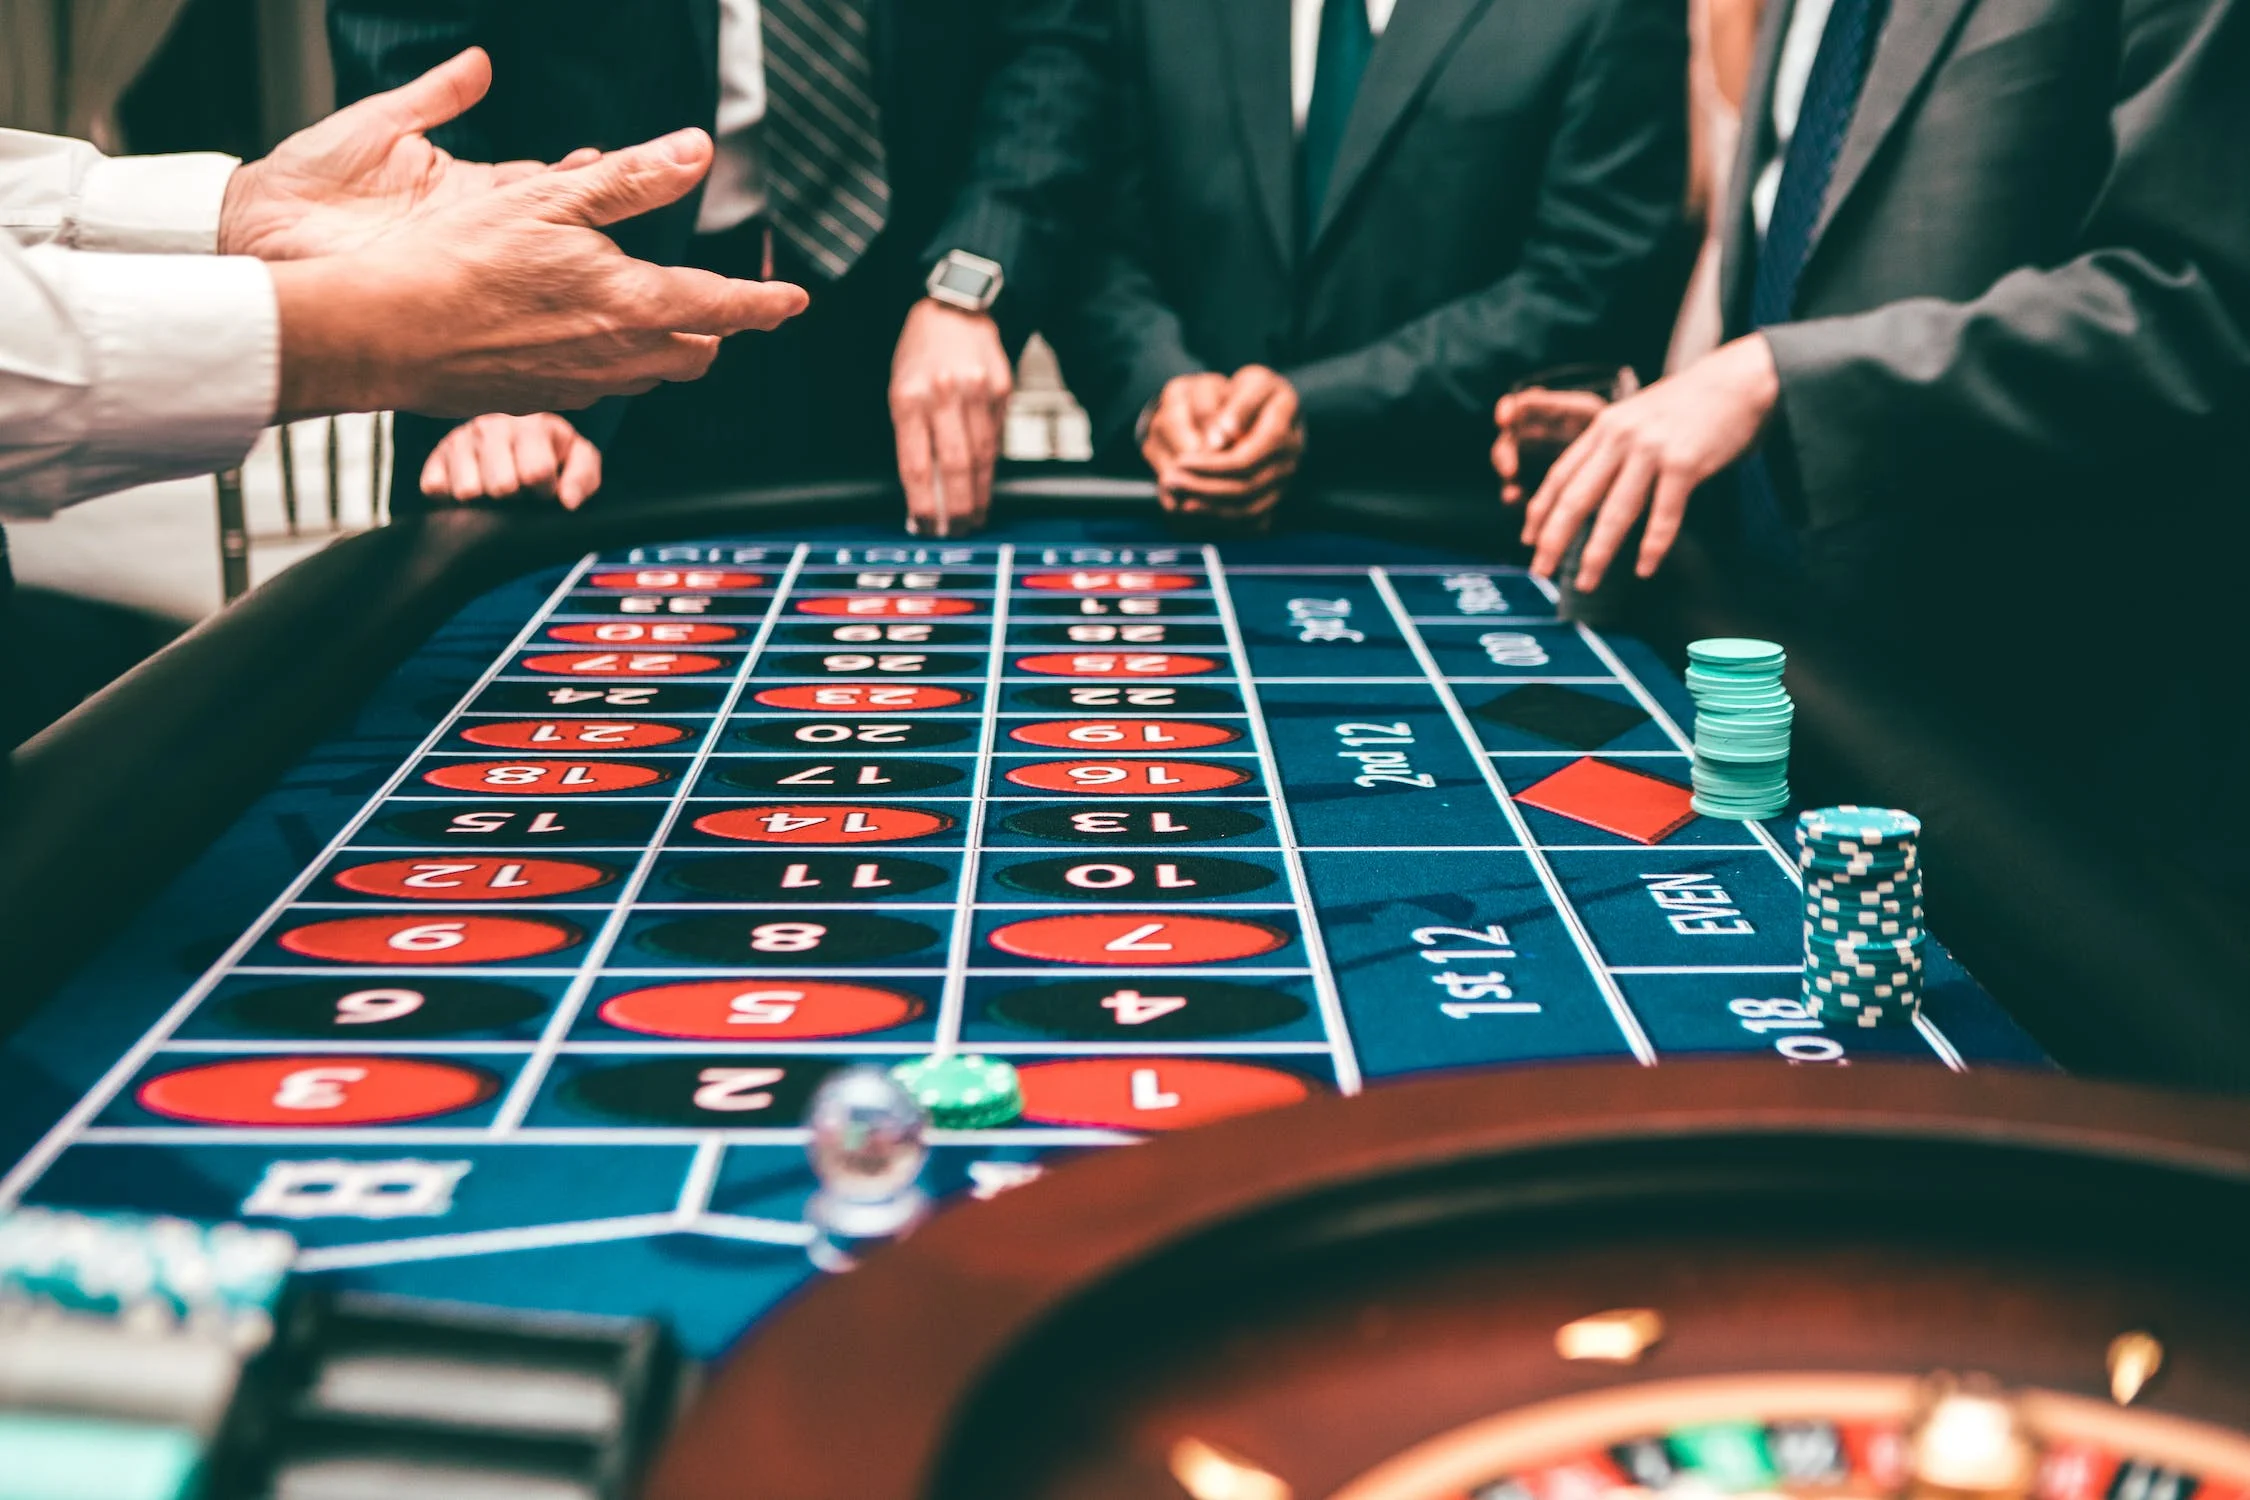 Qualities That Separate Smart Gamblers From the Rest